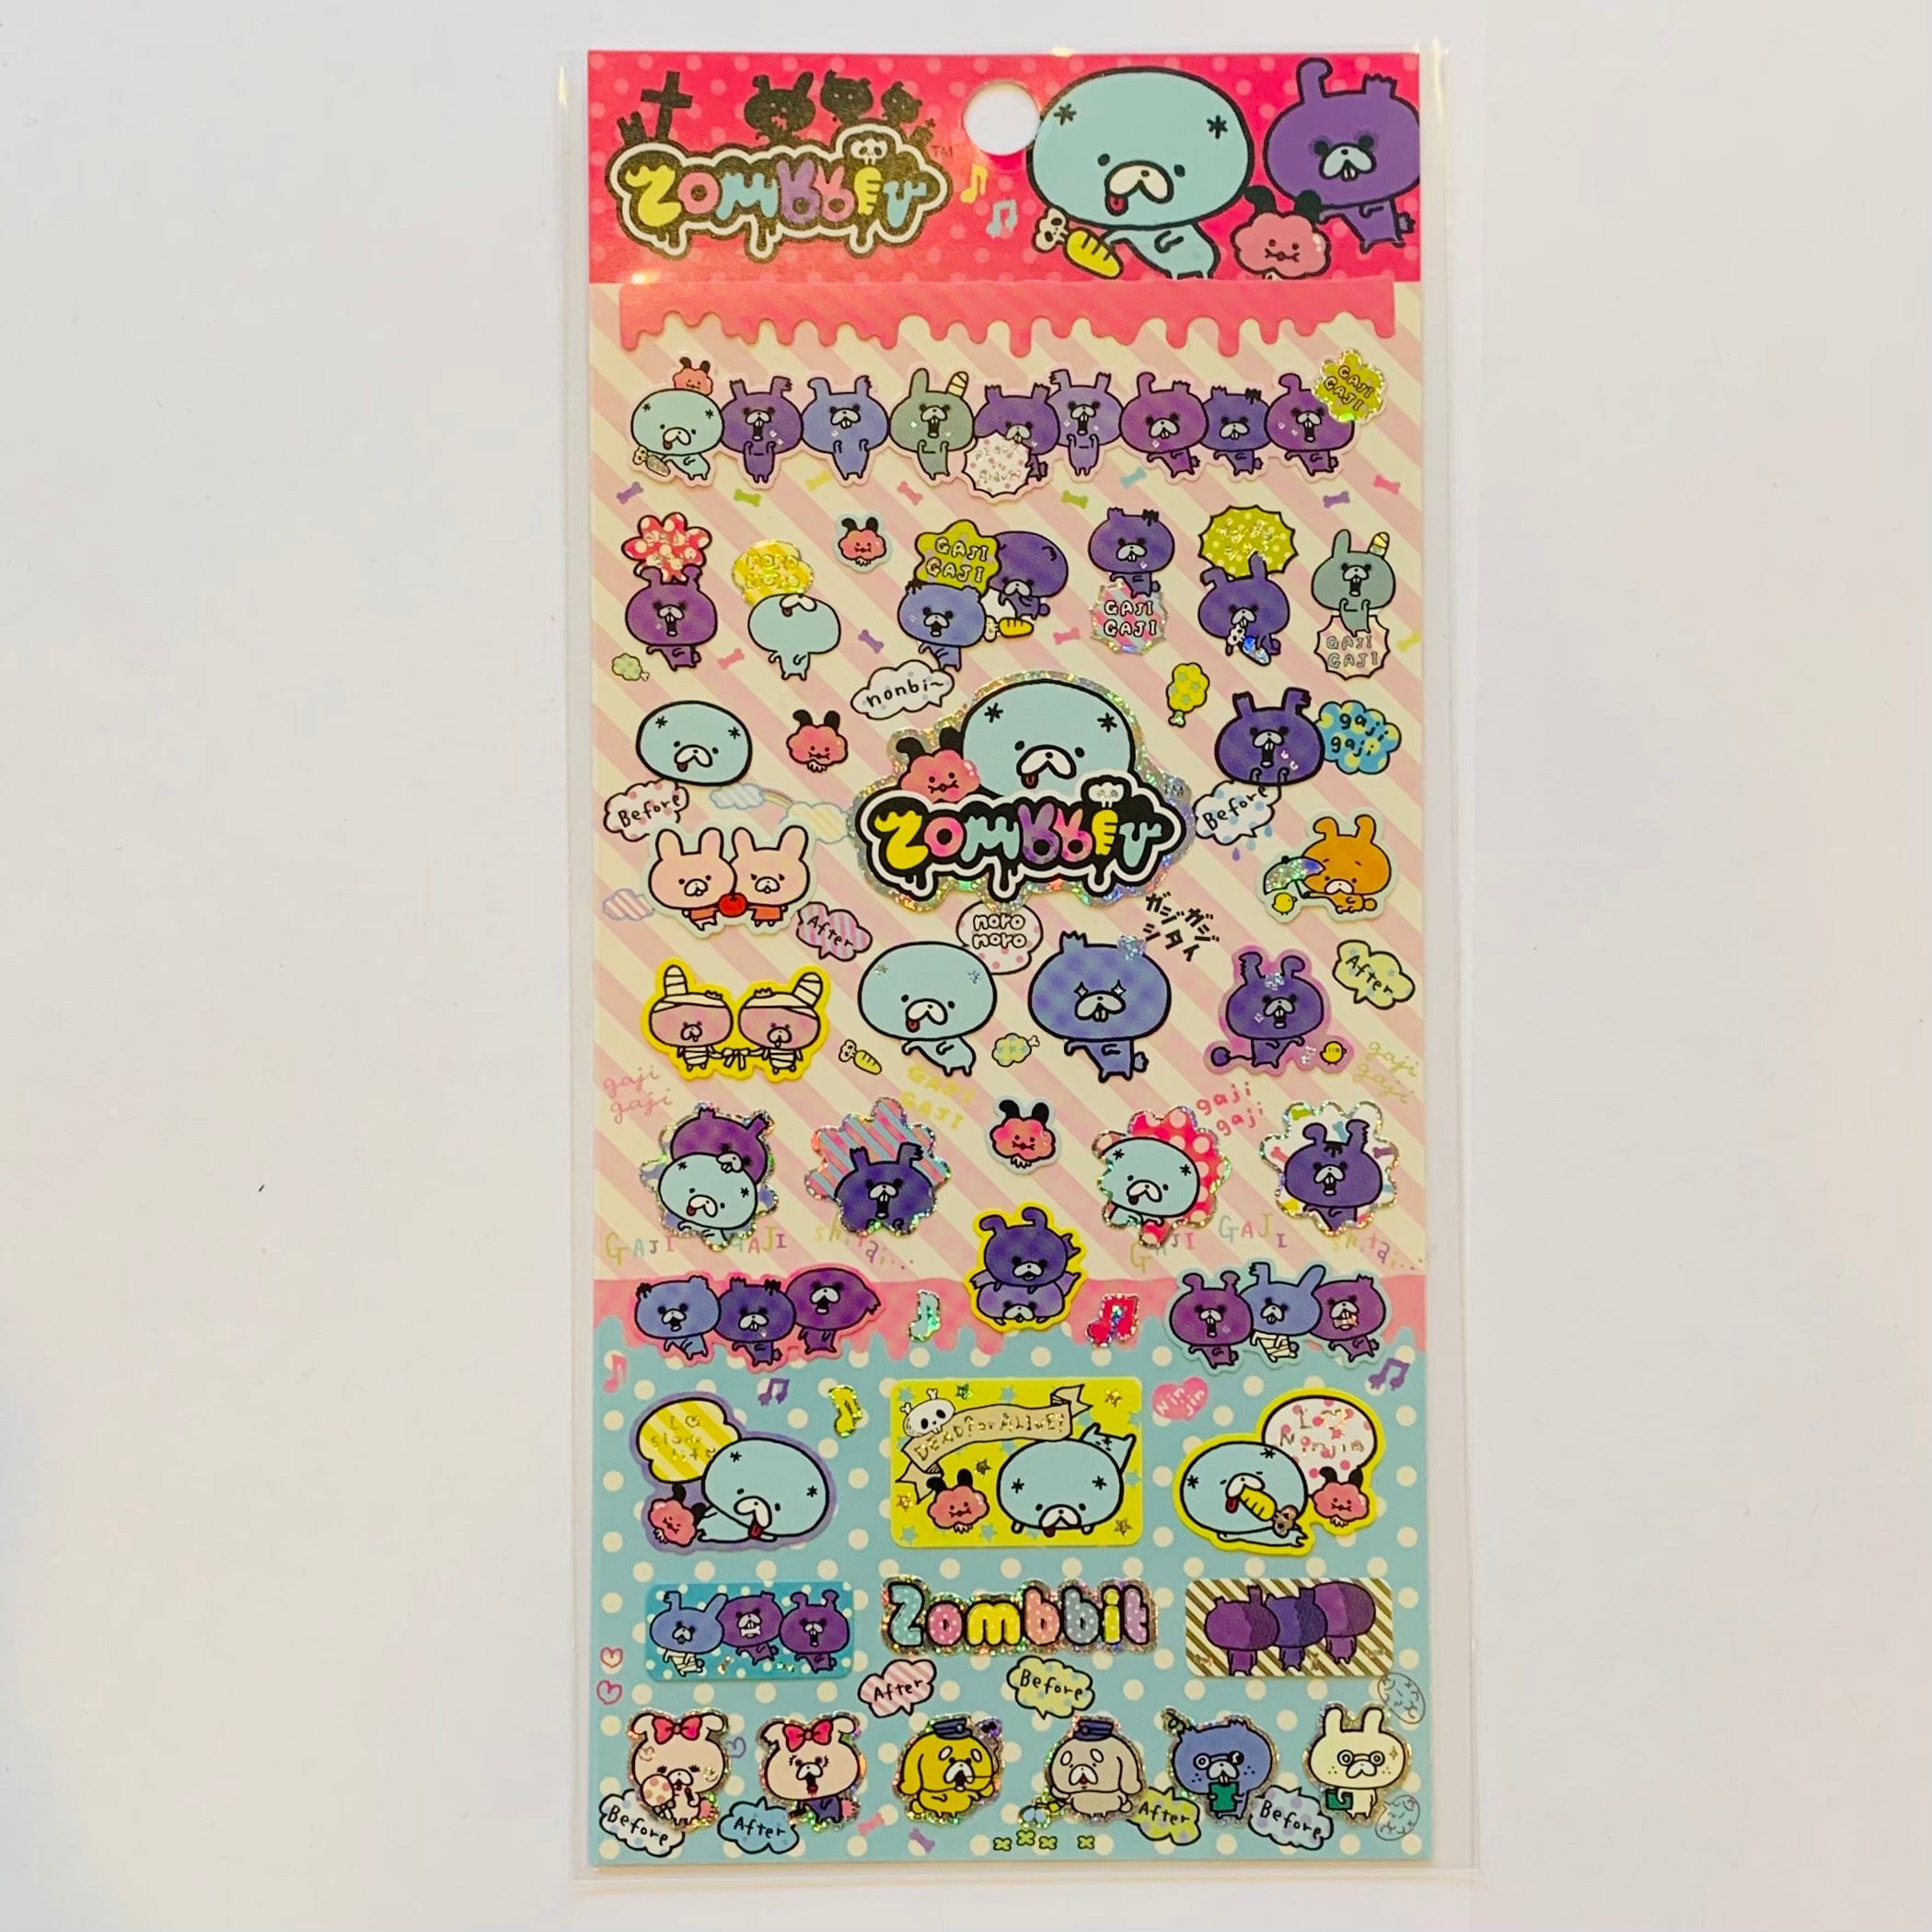 Chocopa Mamegoma Puffy Squishy Sticker Sheets choose 1 Stickers Kawaii  Japan Gifts Back to School Planners Stationery Crafts 